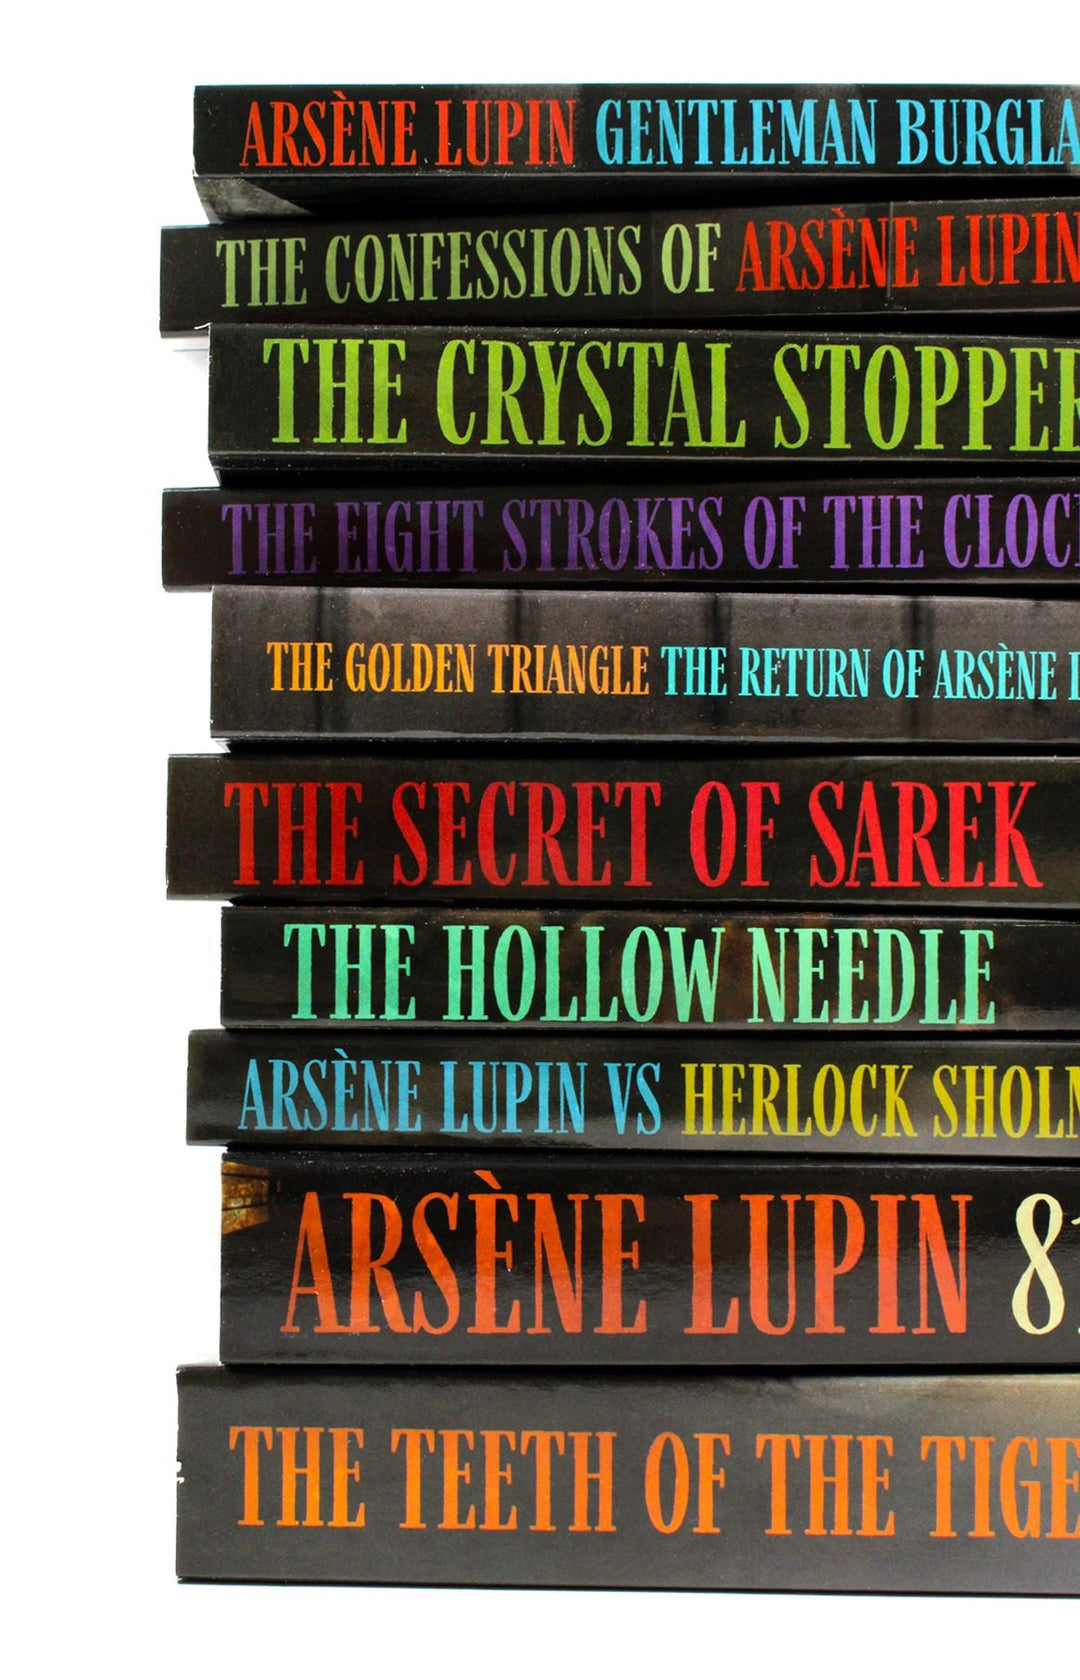 The Complete Collection of Arsene Lupin 10 Books Box Set by Maurice LeBlanc